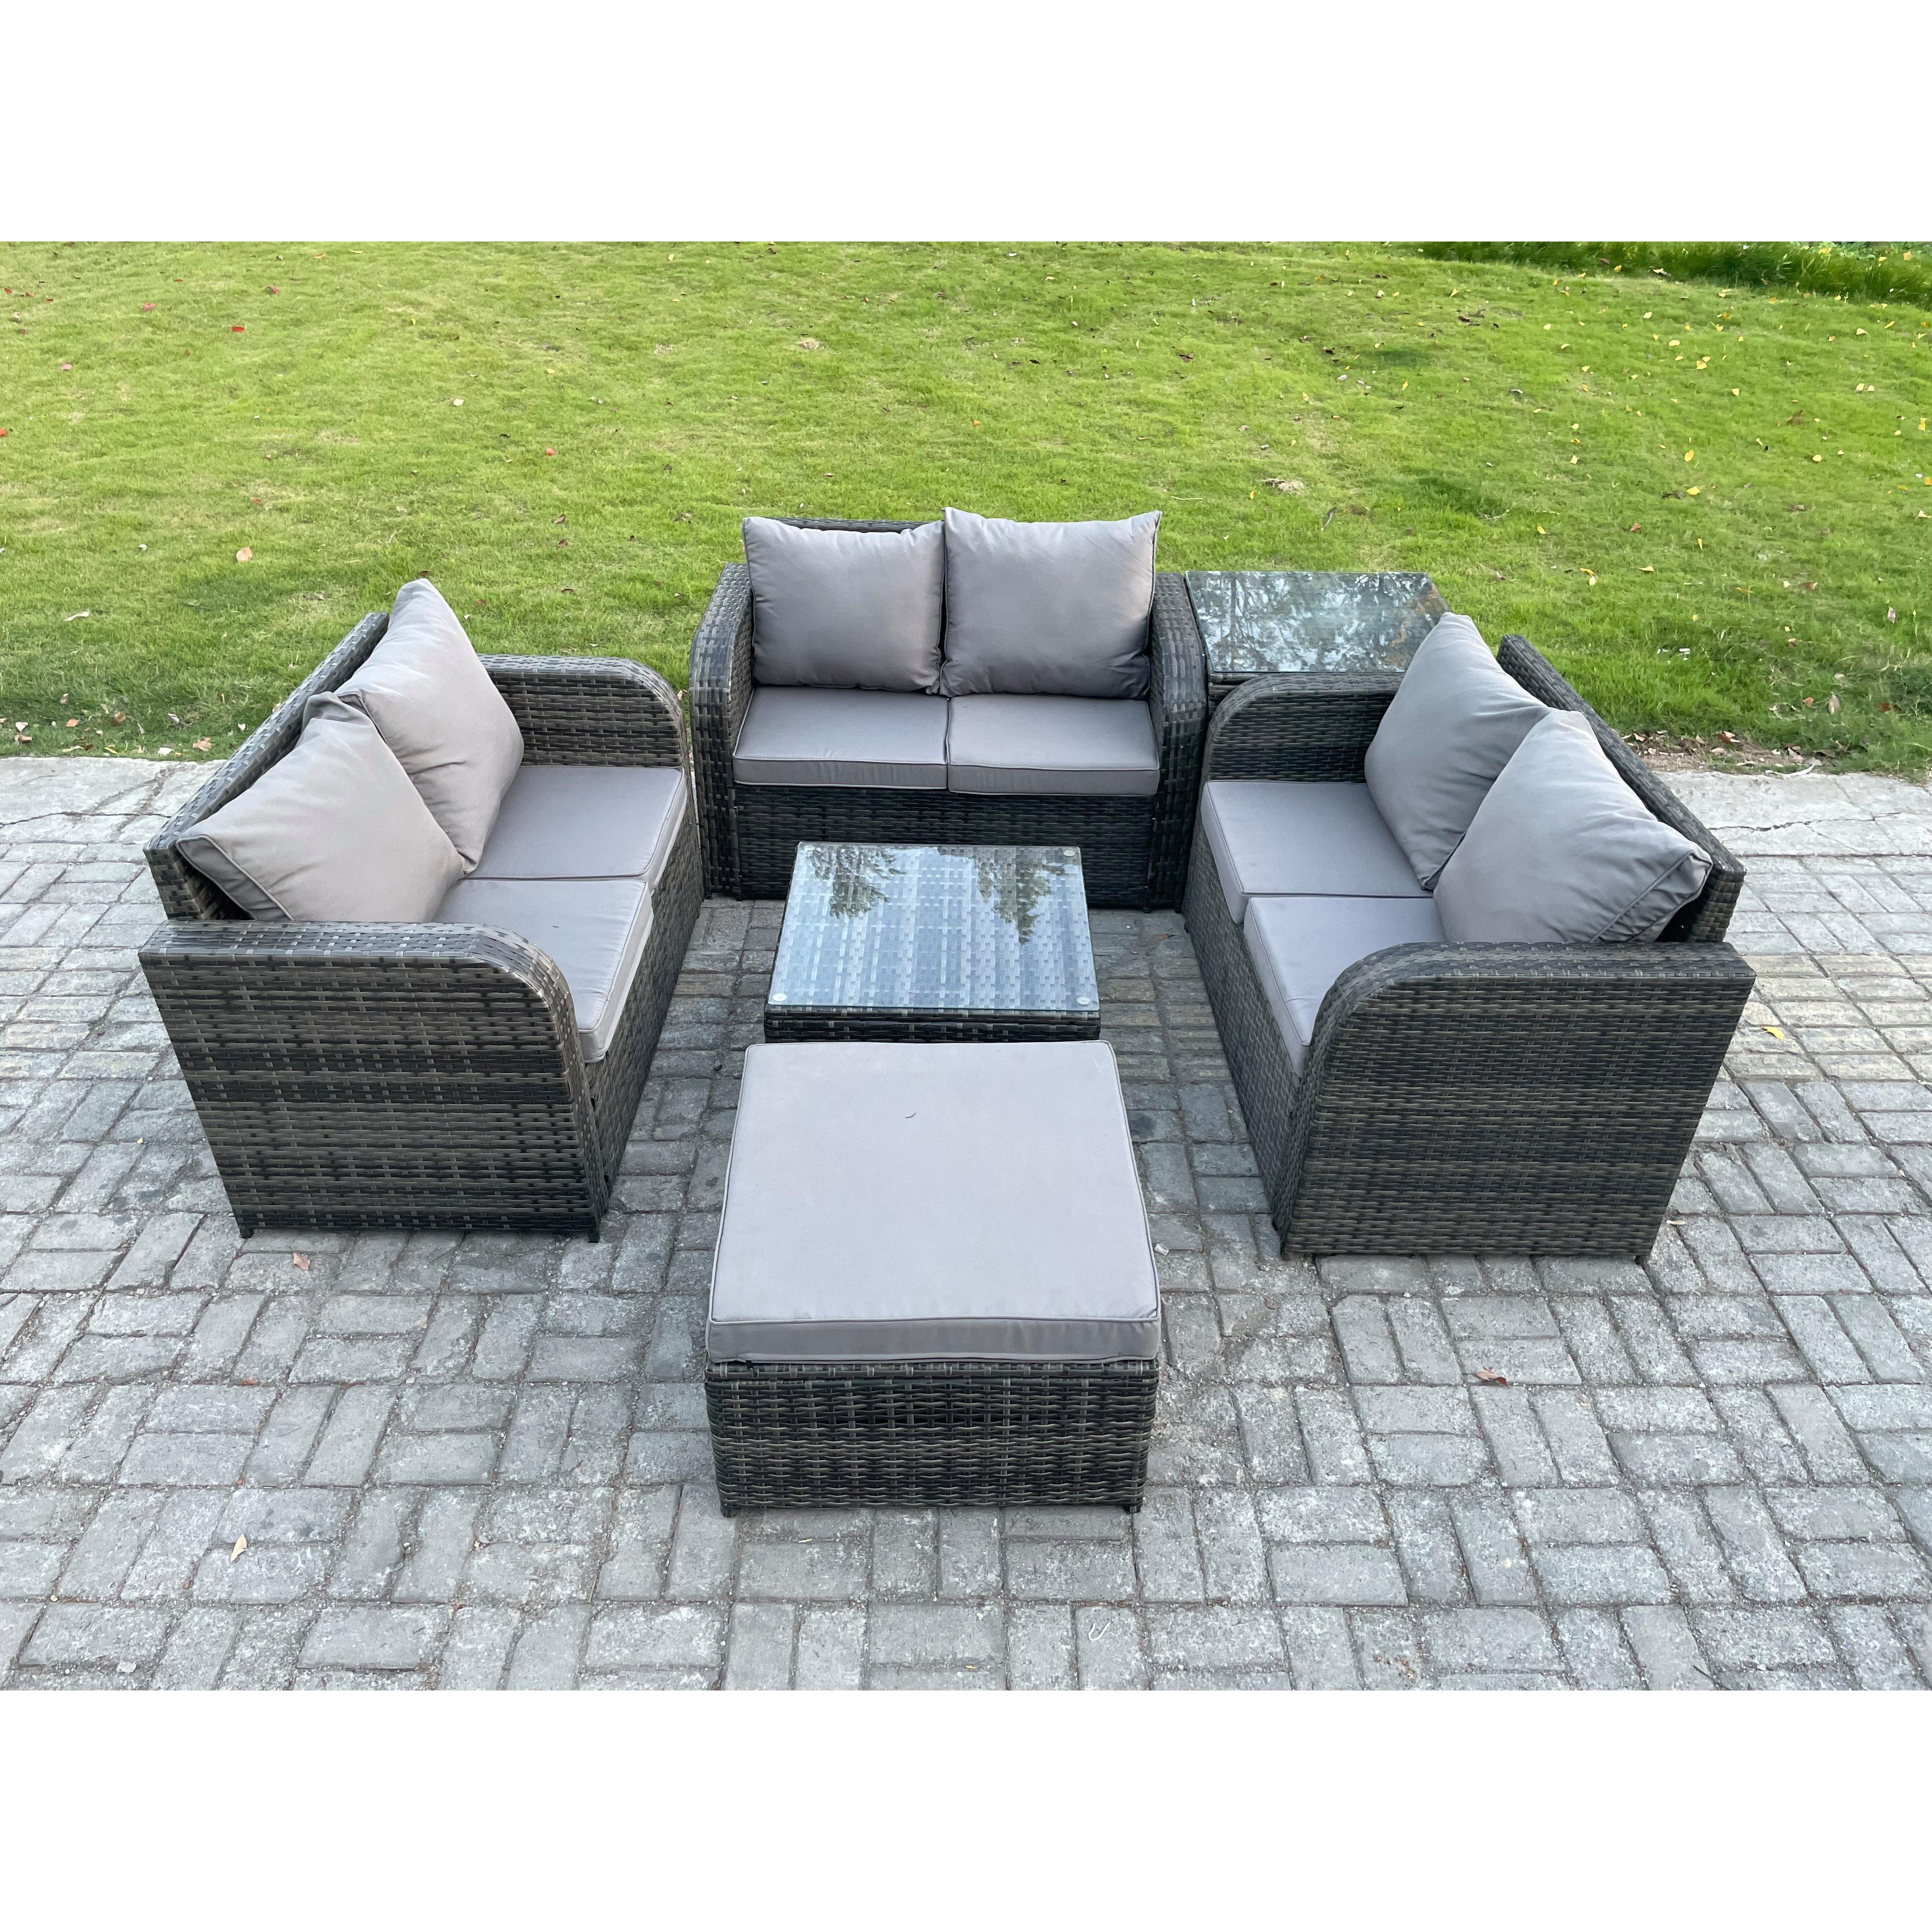 Outdoor Garden Furniture Sets 7 Seater Wicker Rattan Furniture Sofa Sets with Square Coffee Table Love seat Sofa Footstool - image 1